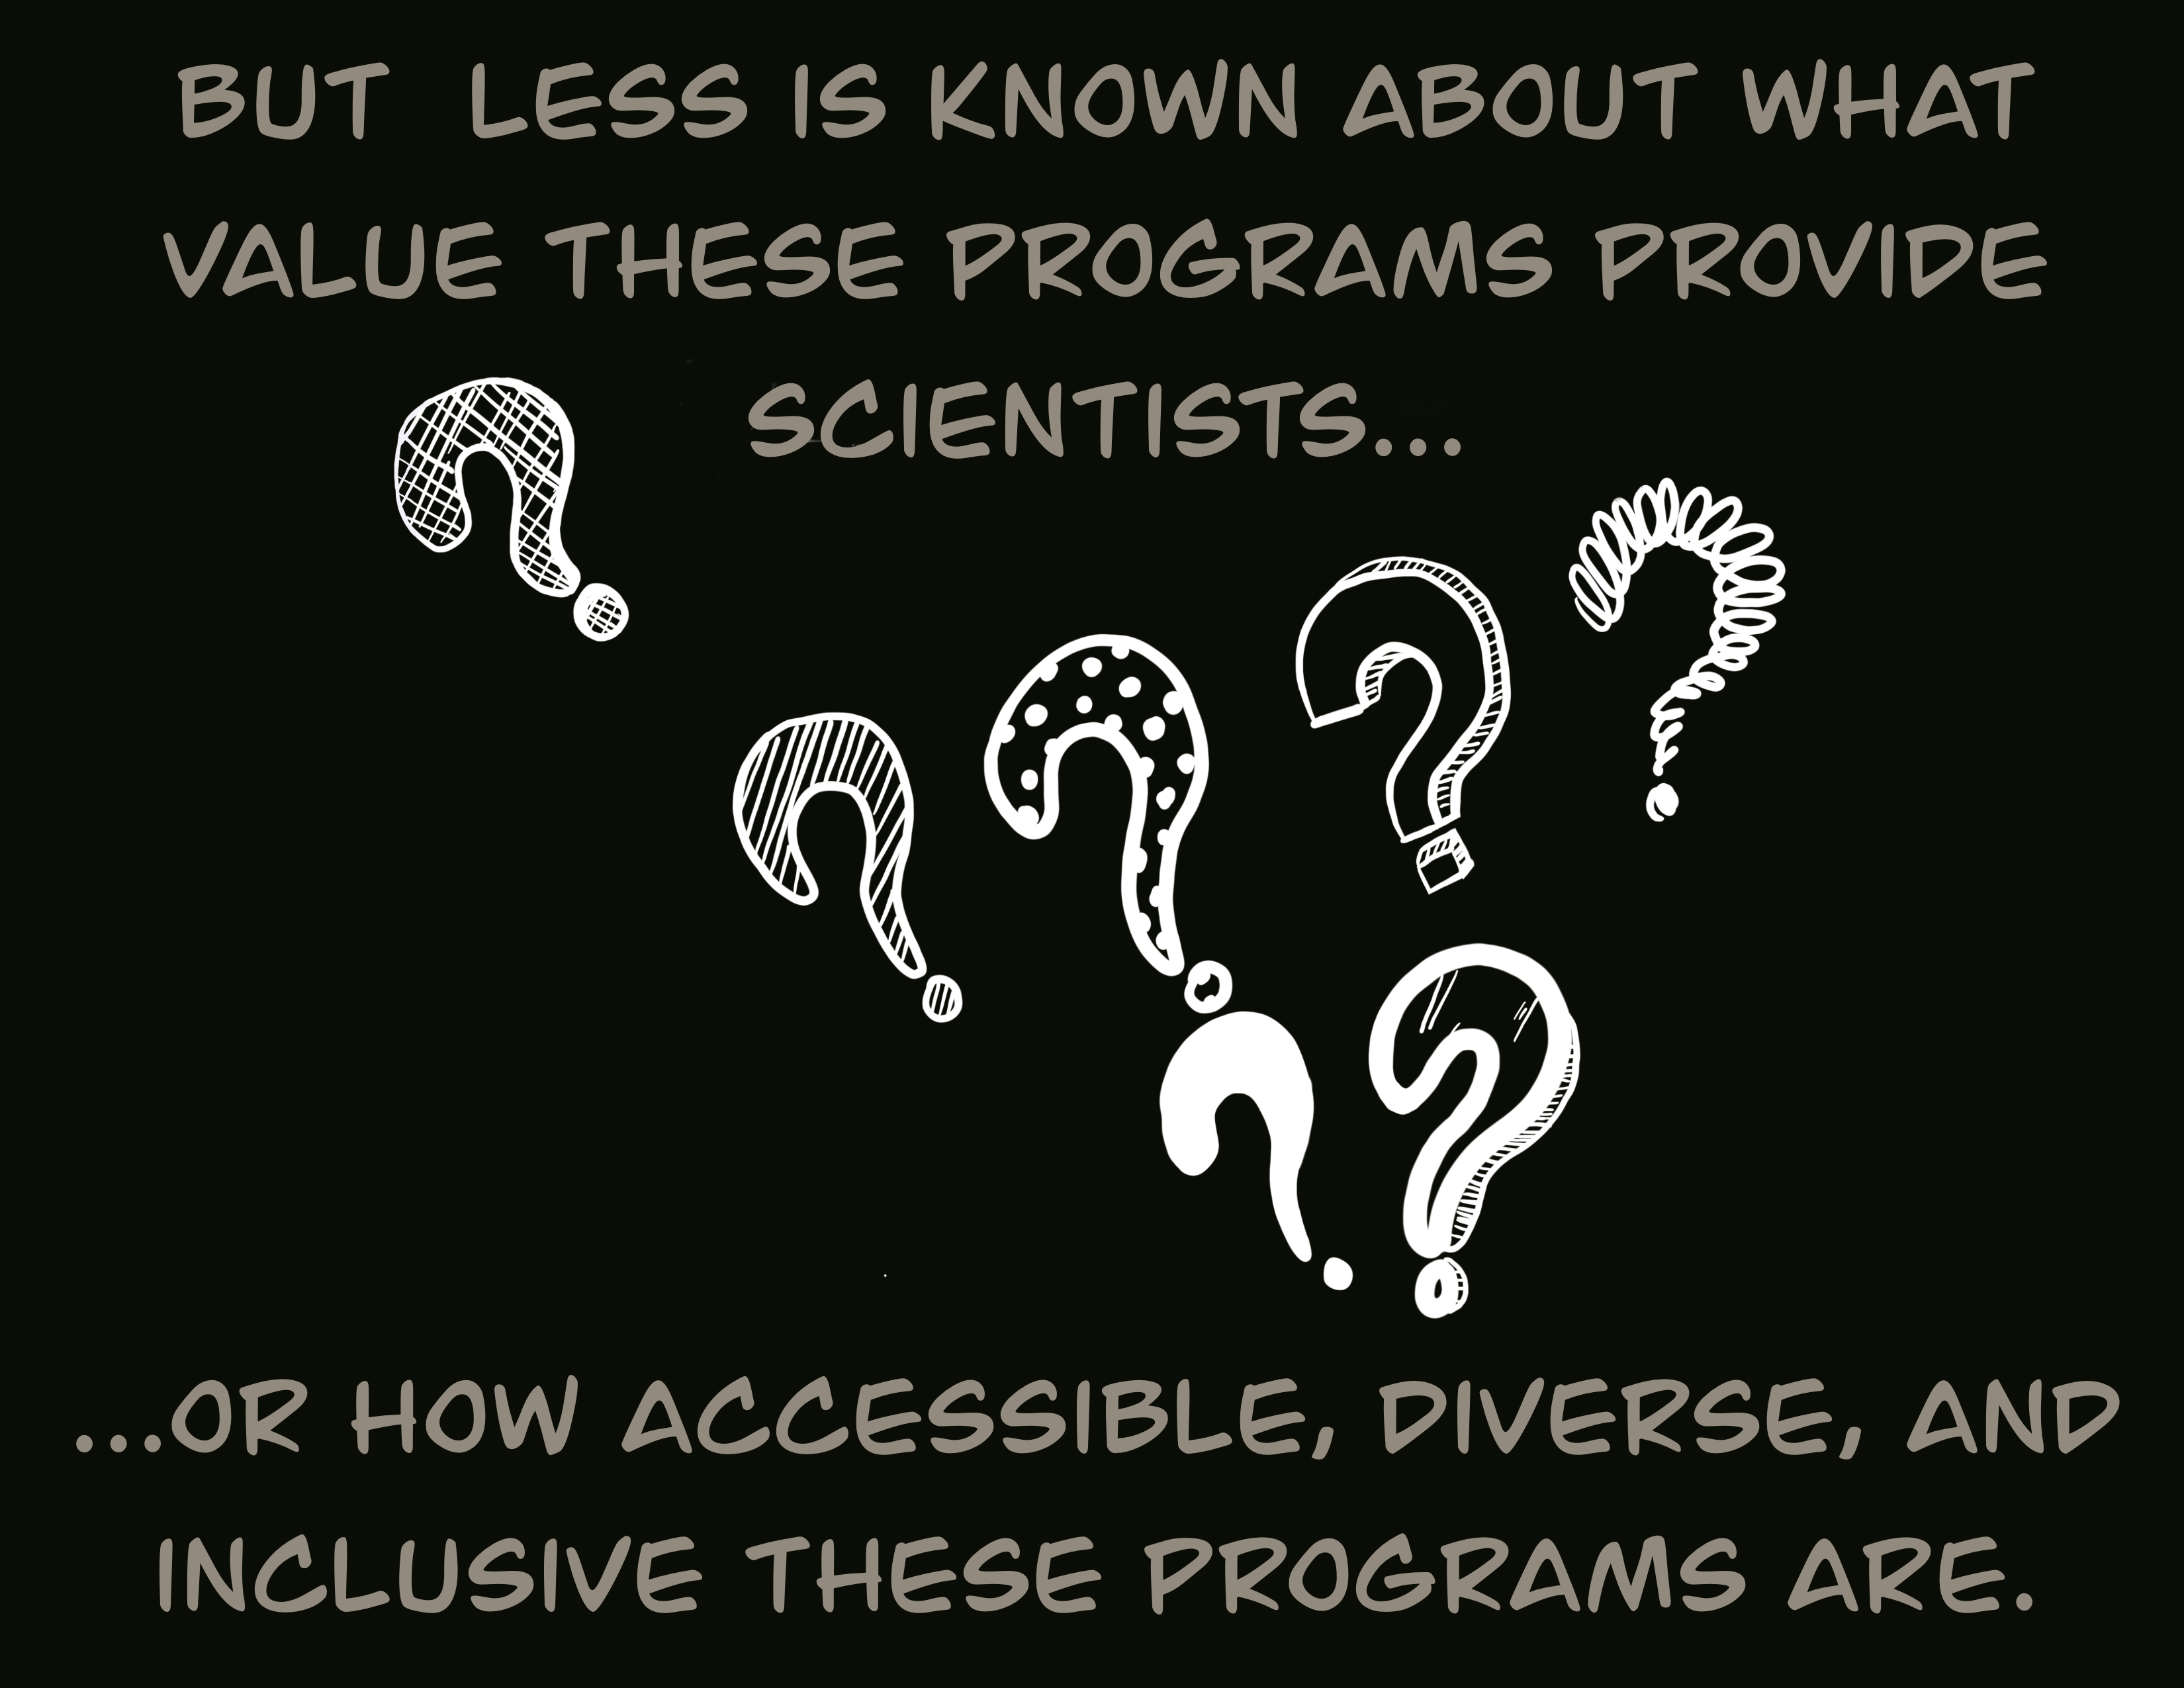 But less is known about what value these programs provide scientists, or how accessible, diverse, and inclusive these programs are.